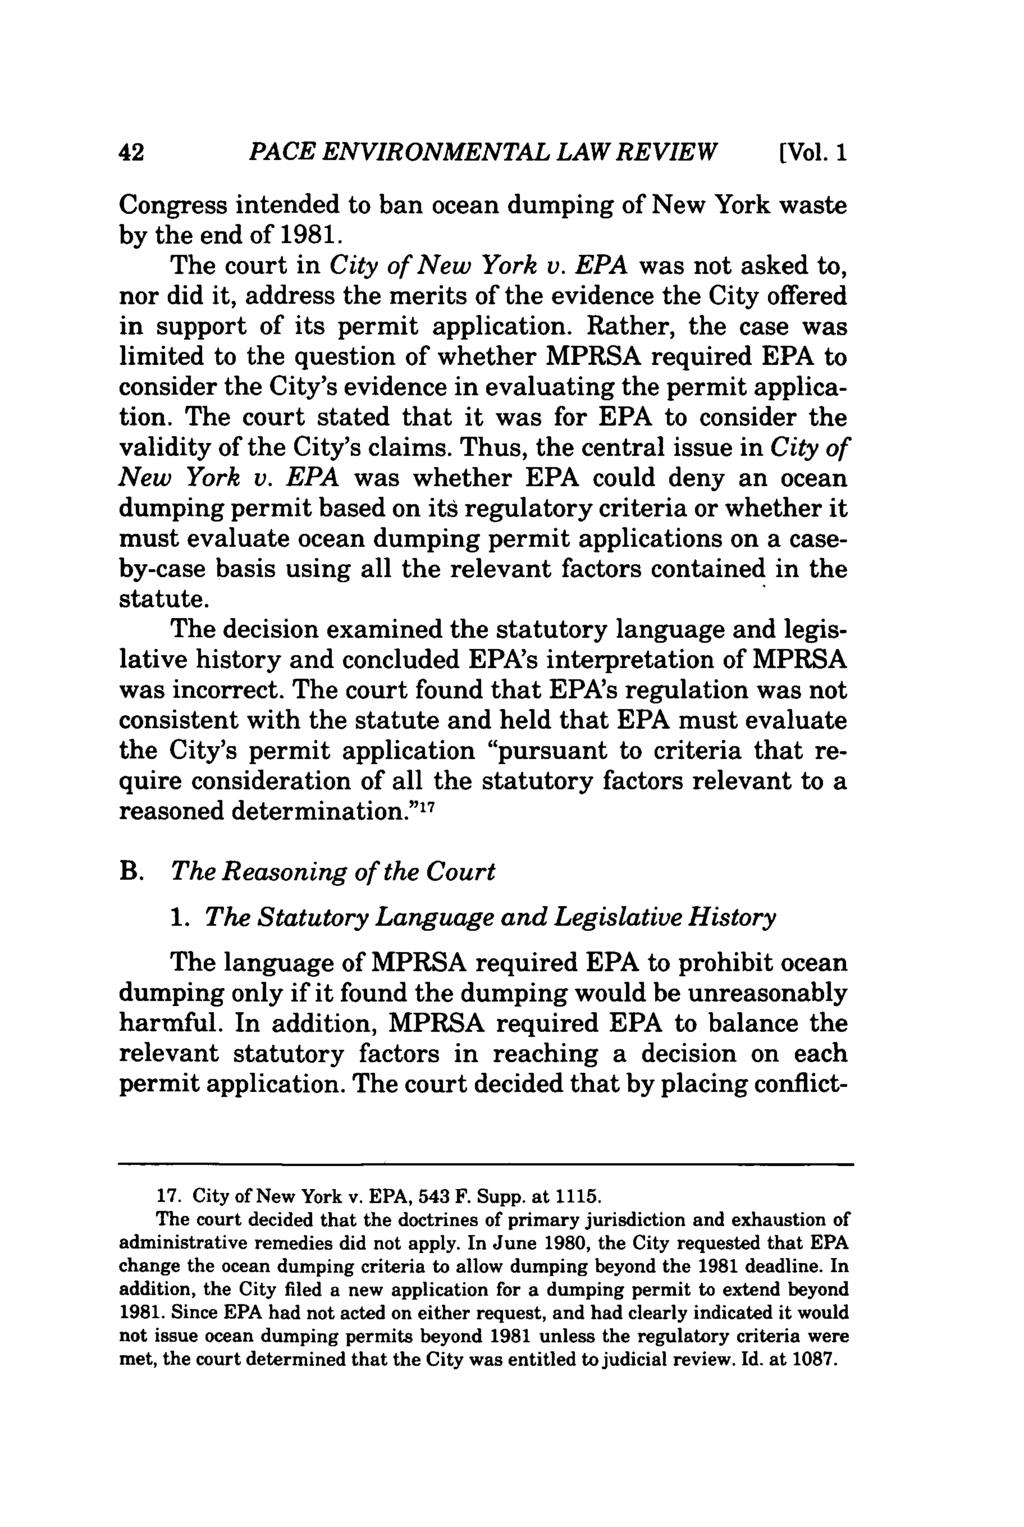 PACE ENVIRONMENTAL LAW REVIEW (Vol. 1 Congress intended to ban ocean dumping of New York waste by the end of 1981. The court in City of New York v.